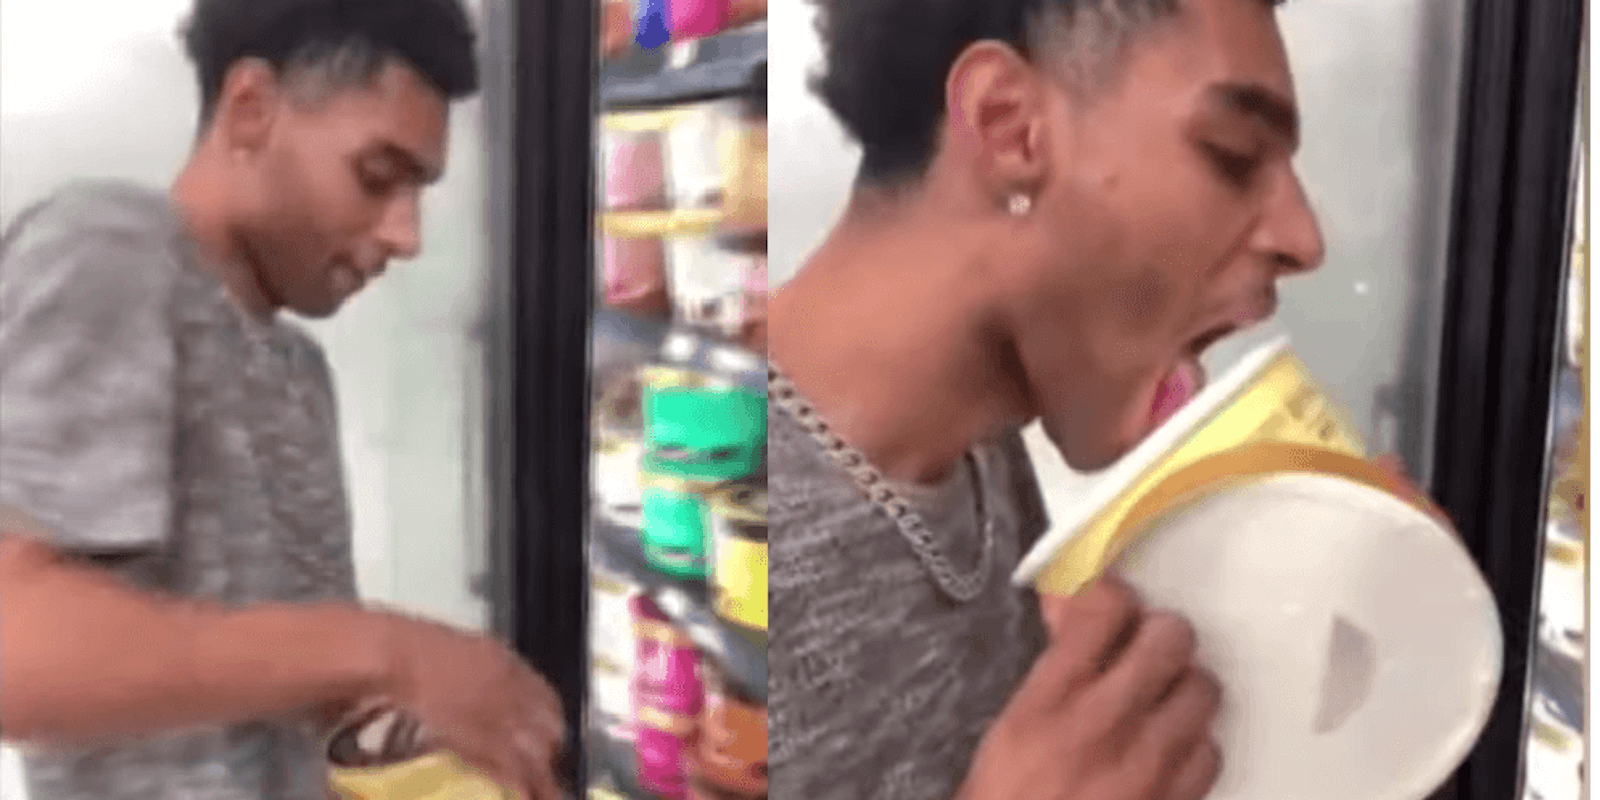 Screenshots show D’Adrien Anderson opening a tub and licking a Blue Bell ice cream